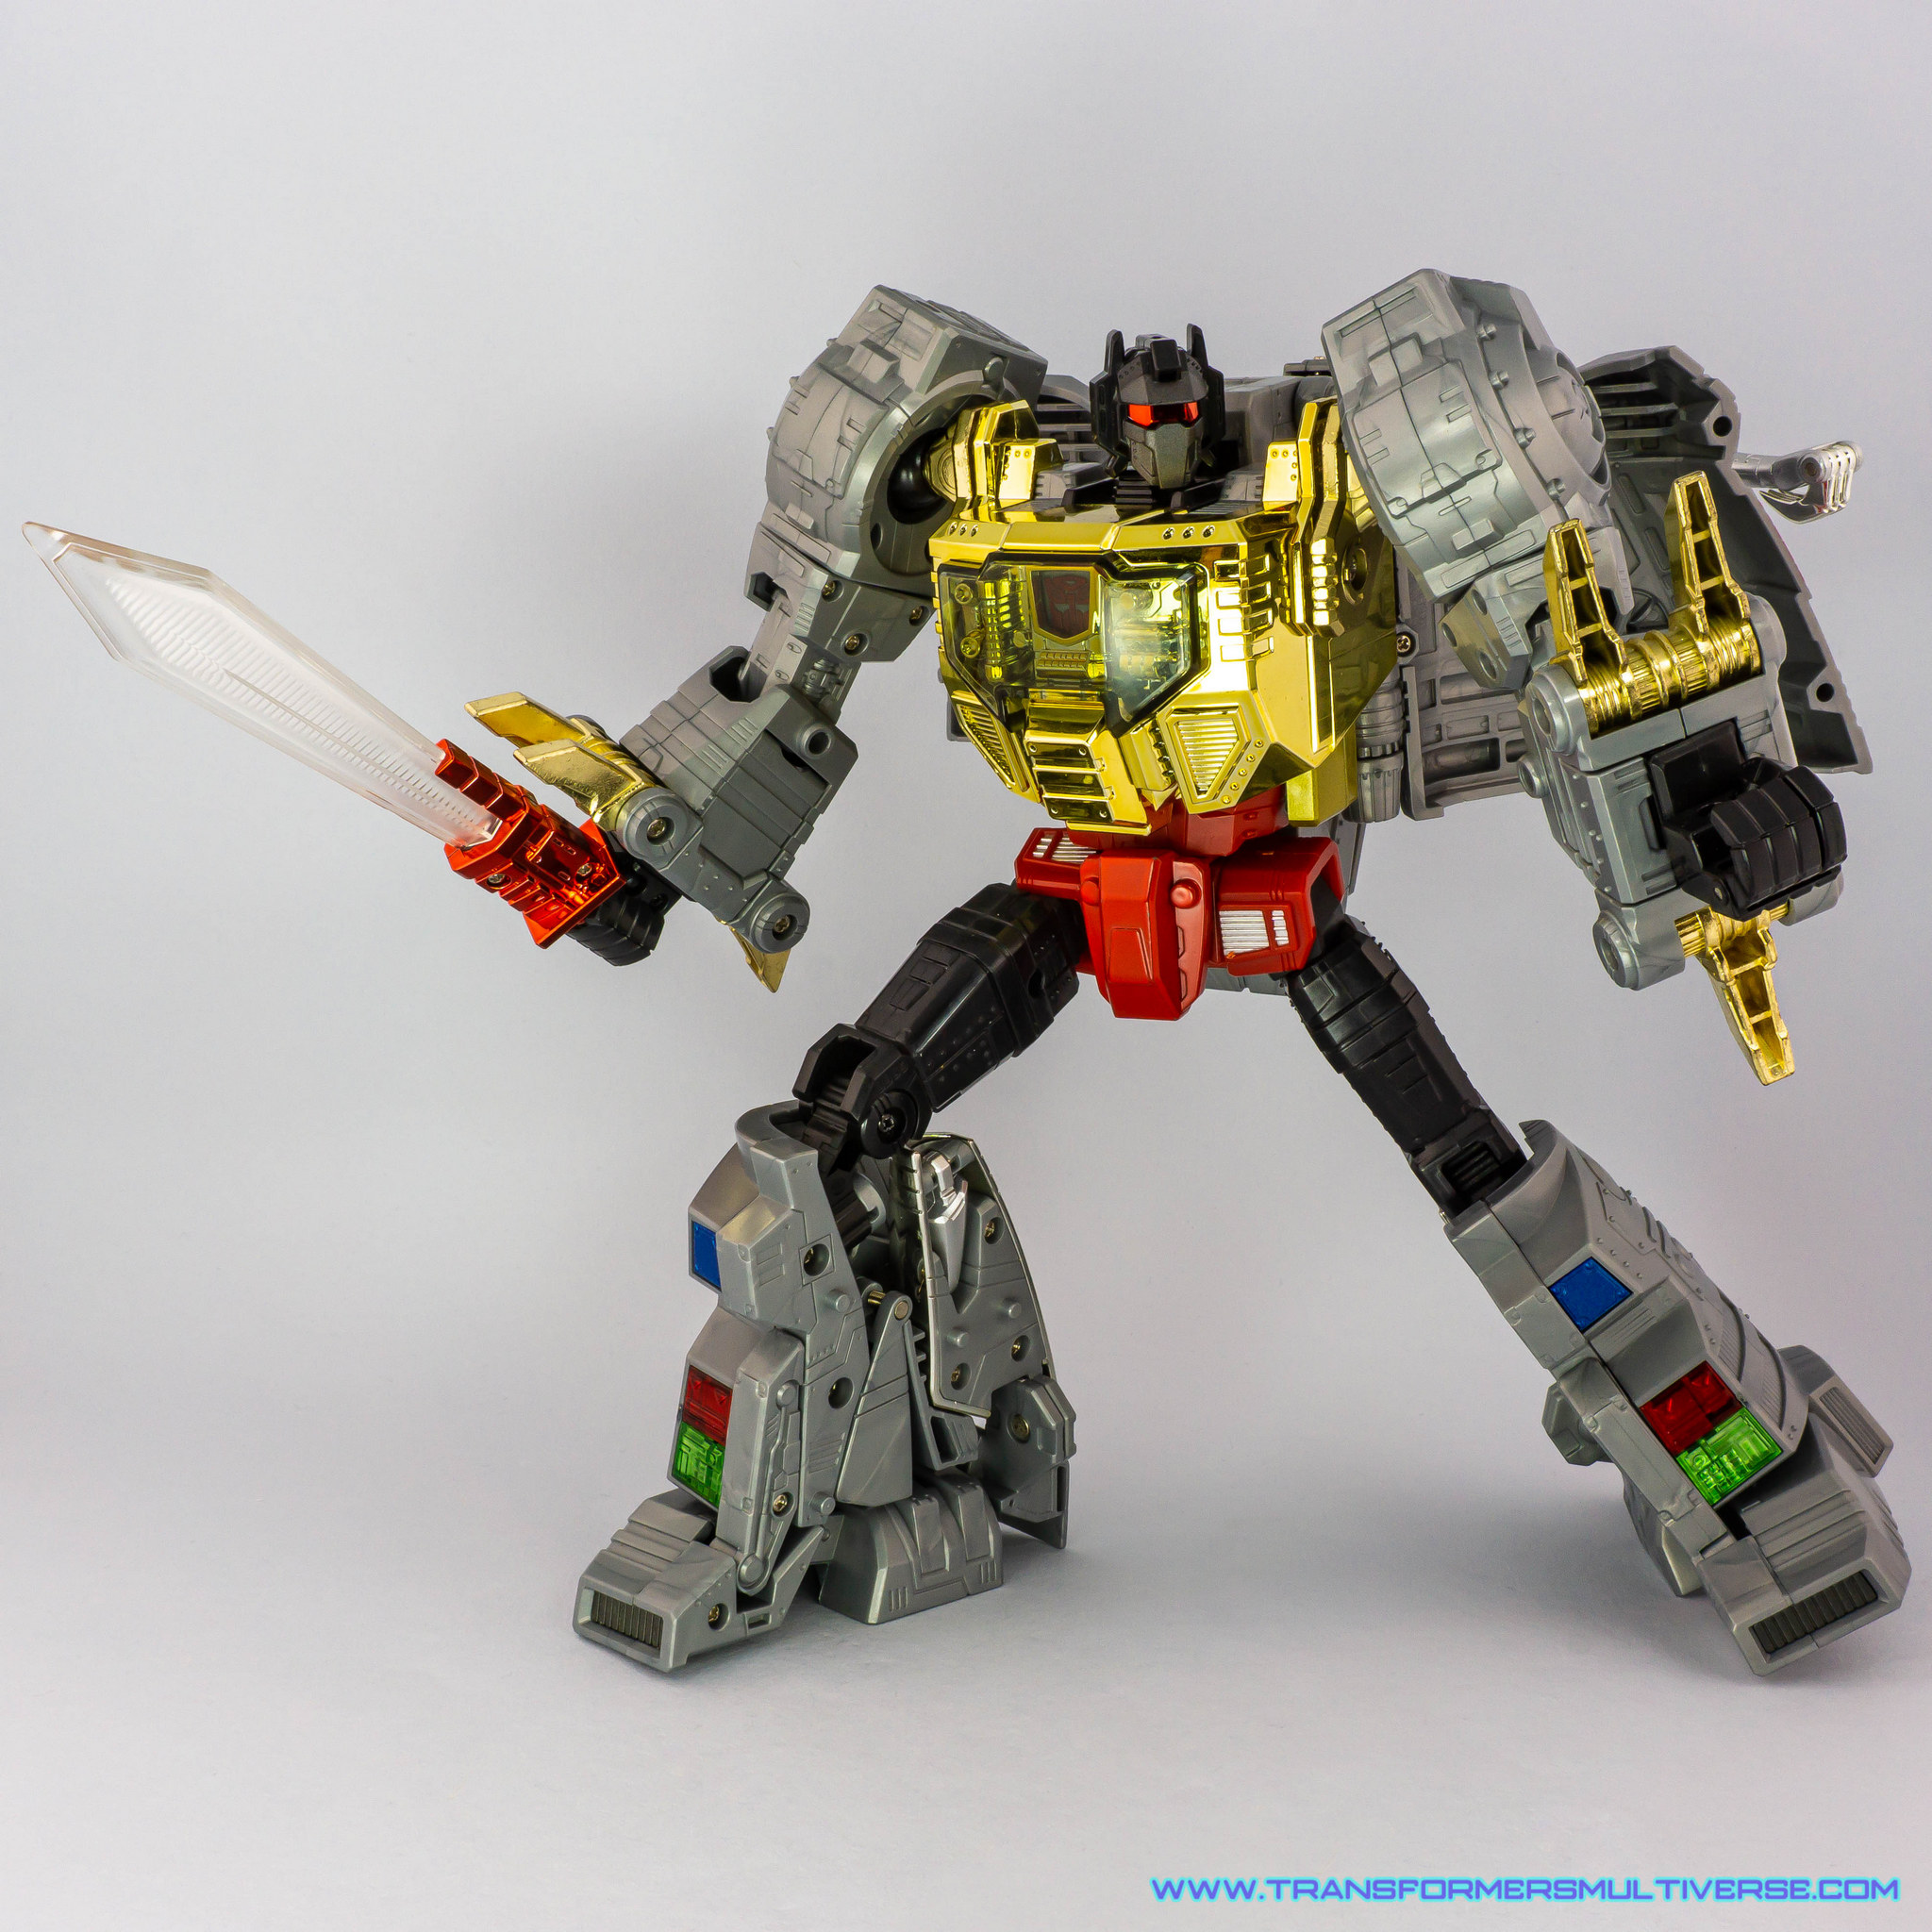 Transformers Masterpiece Grimlock robot mode posed with sword